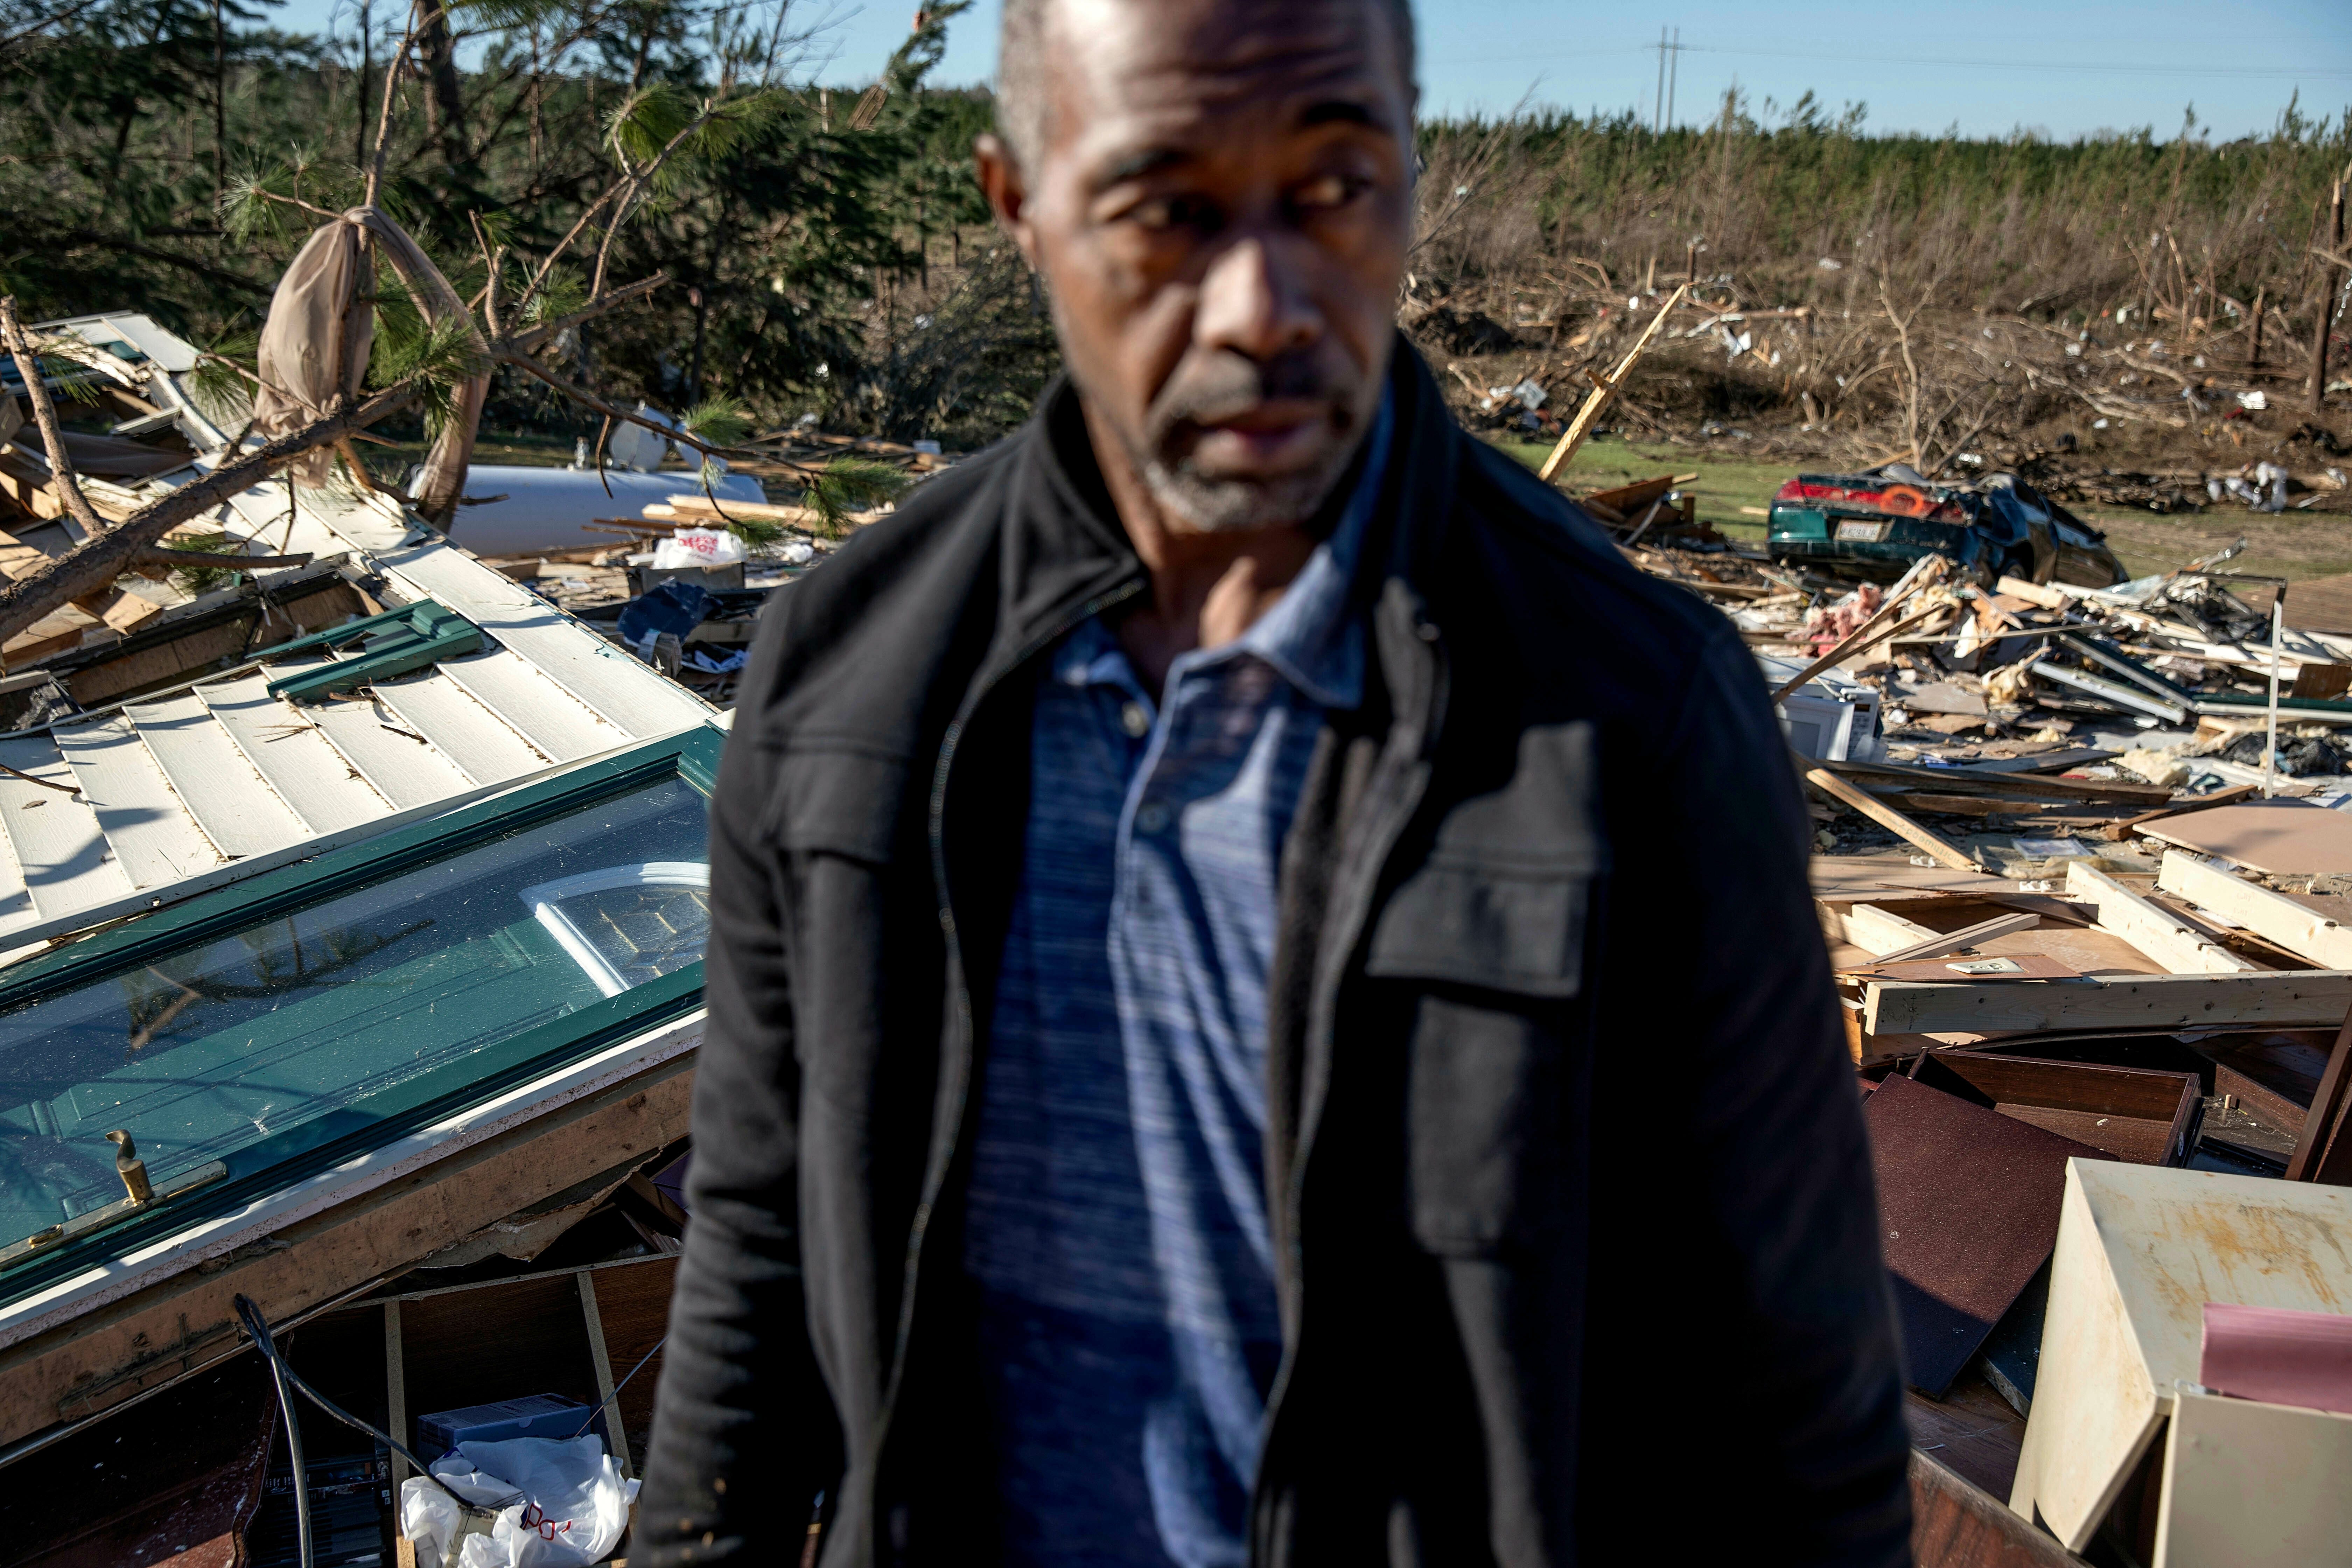 Richard Tate stands amid what's left of his home where he survived a tornado with his wife March 5, 2019 in Beauregard, Ala.